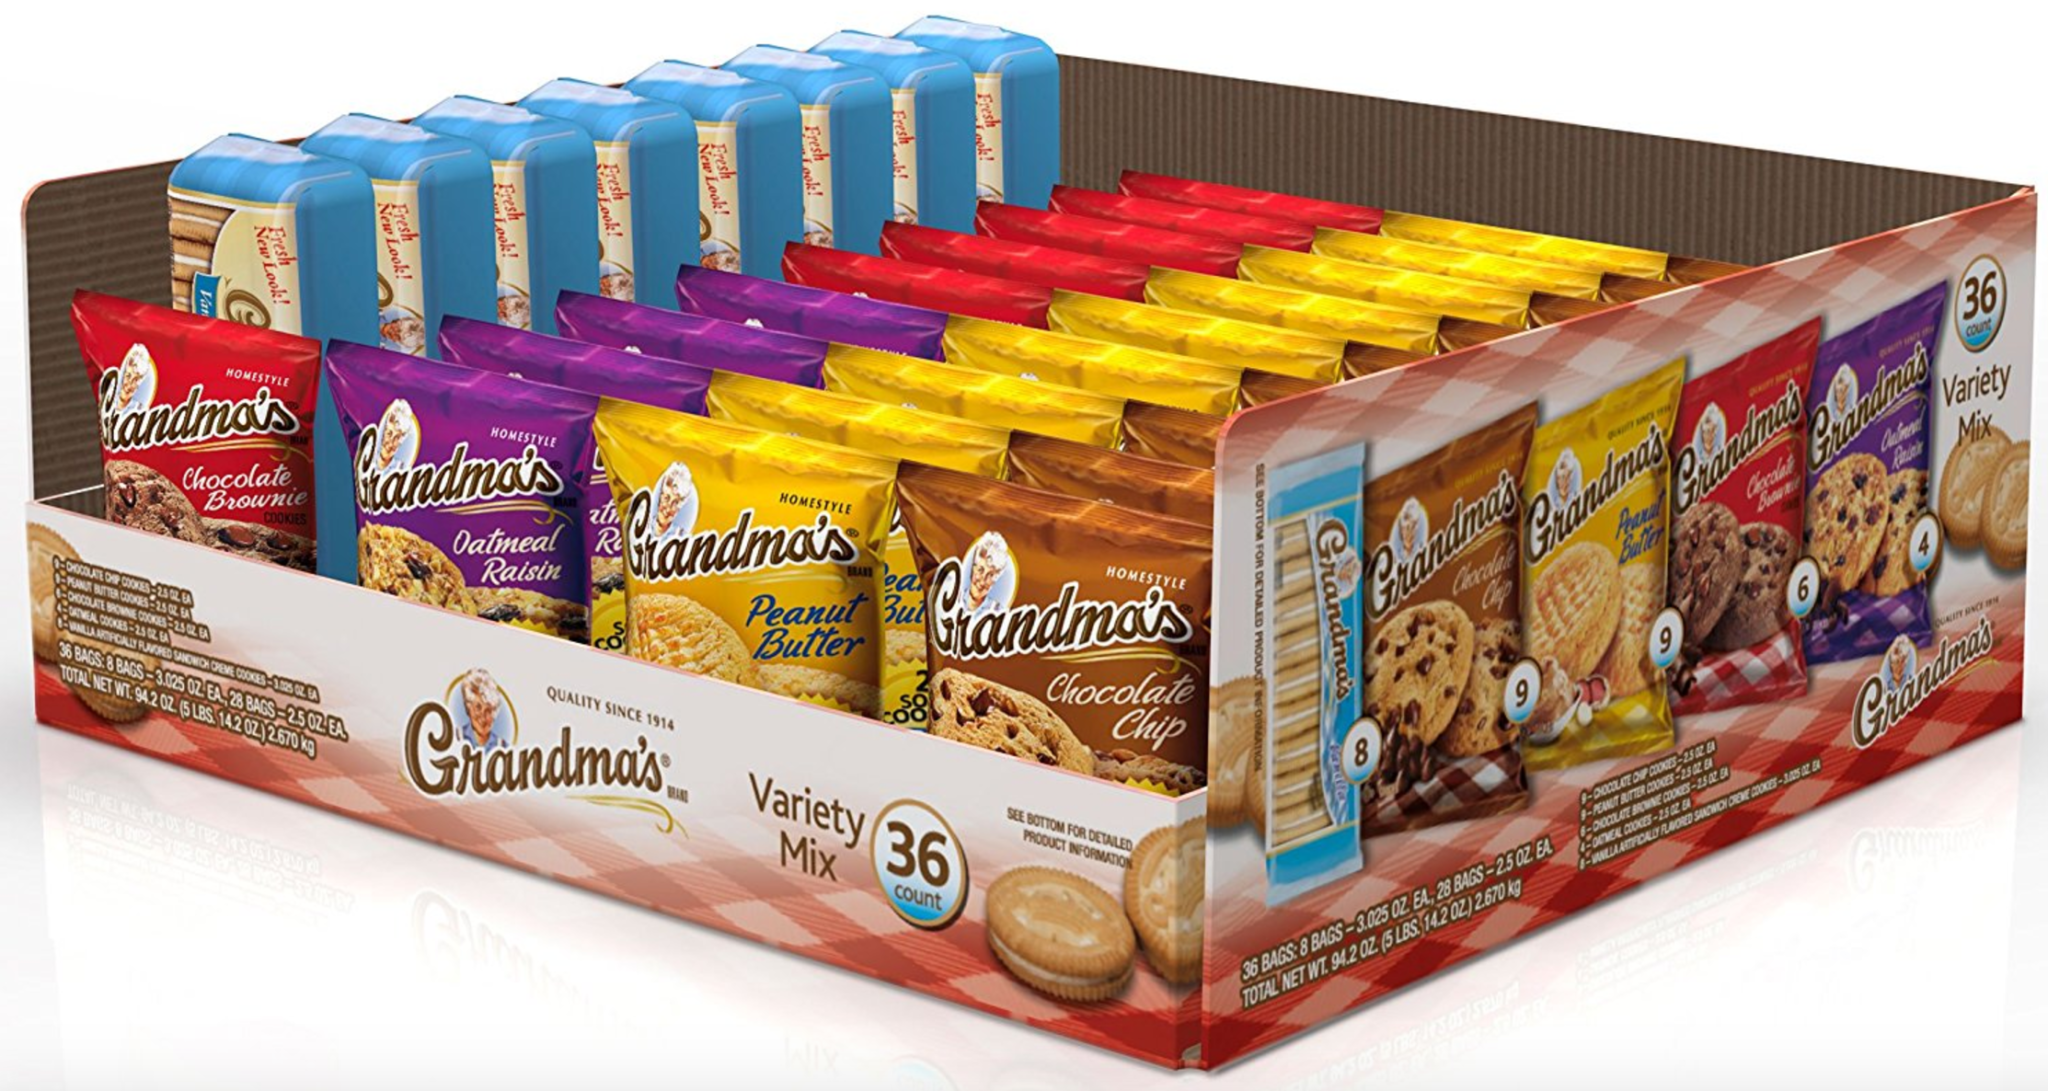 Grandma's Cookies Variety Pack, 36 Count as low as $11.50 or 32¢/Pack Shipped!